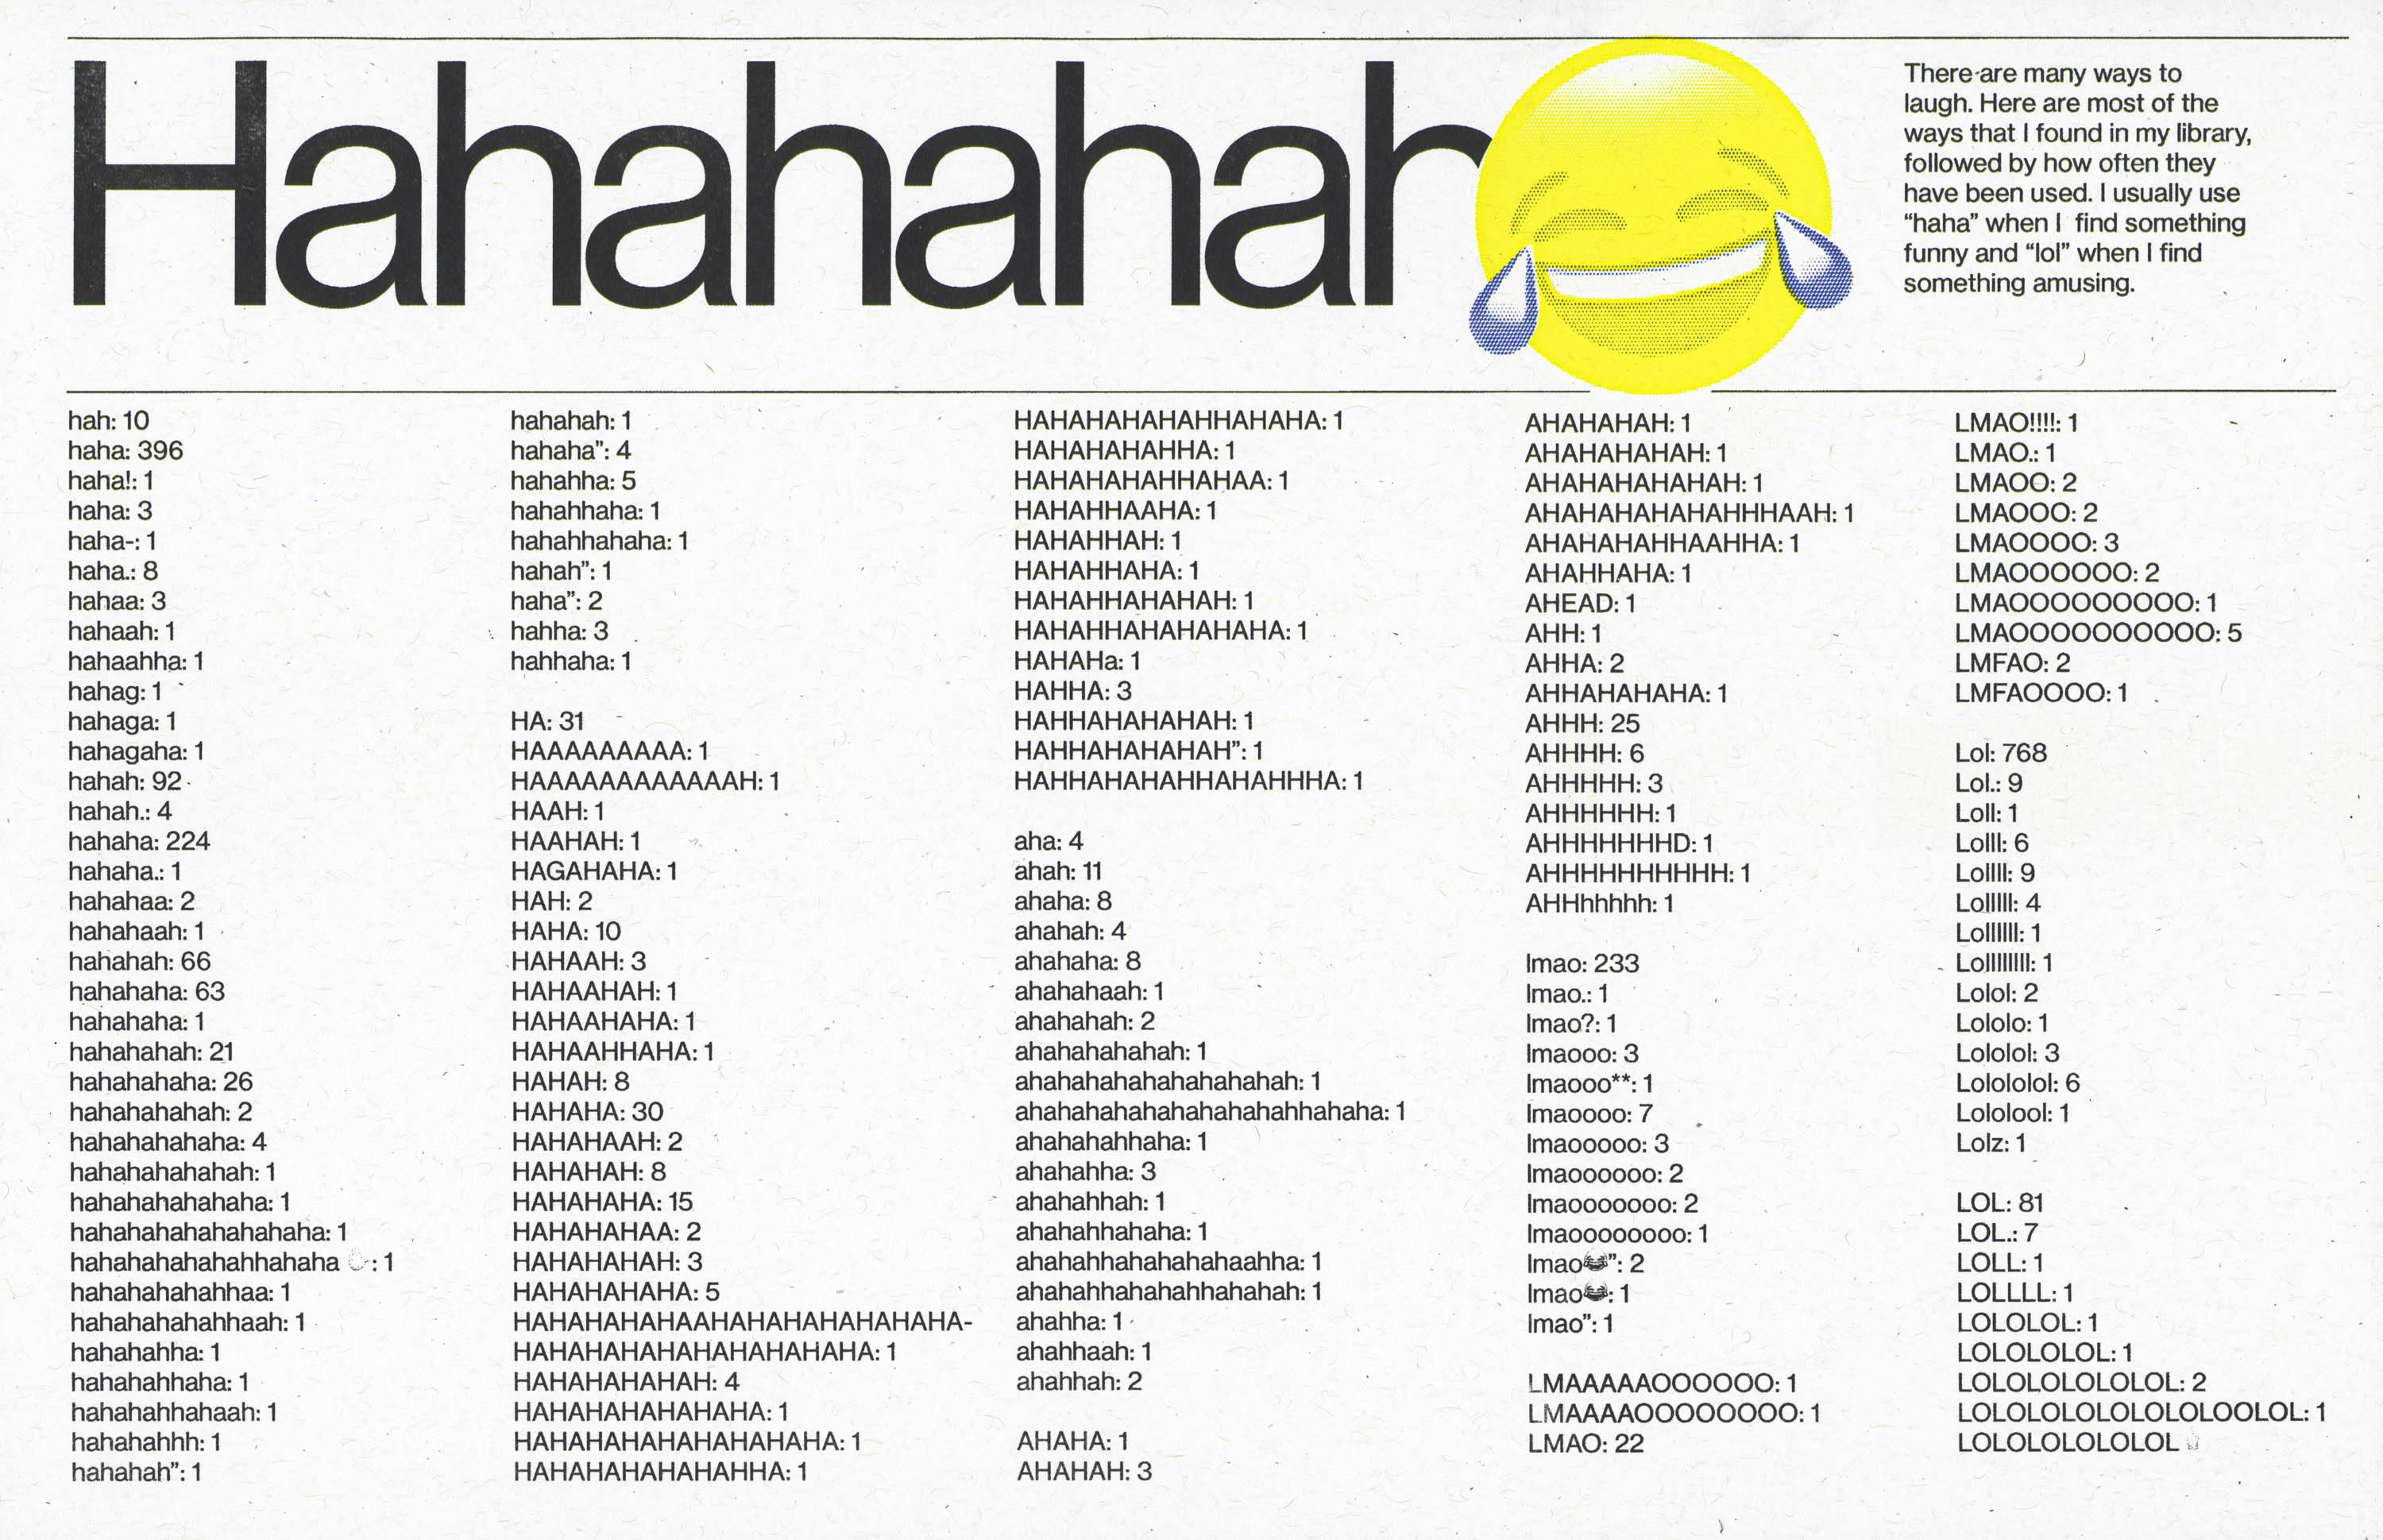 Infographic titled "Hahahah" showcasing the various ways of typing laughter and their counts. It displays long chains of haha, lmao, lol, and other variants, each with a specific count.